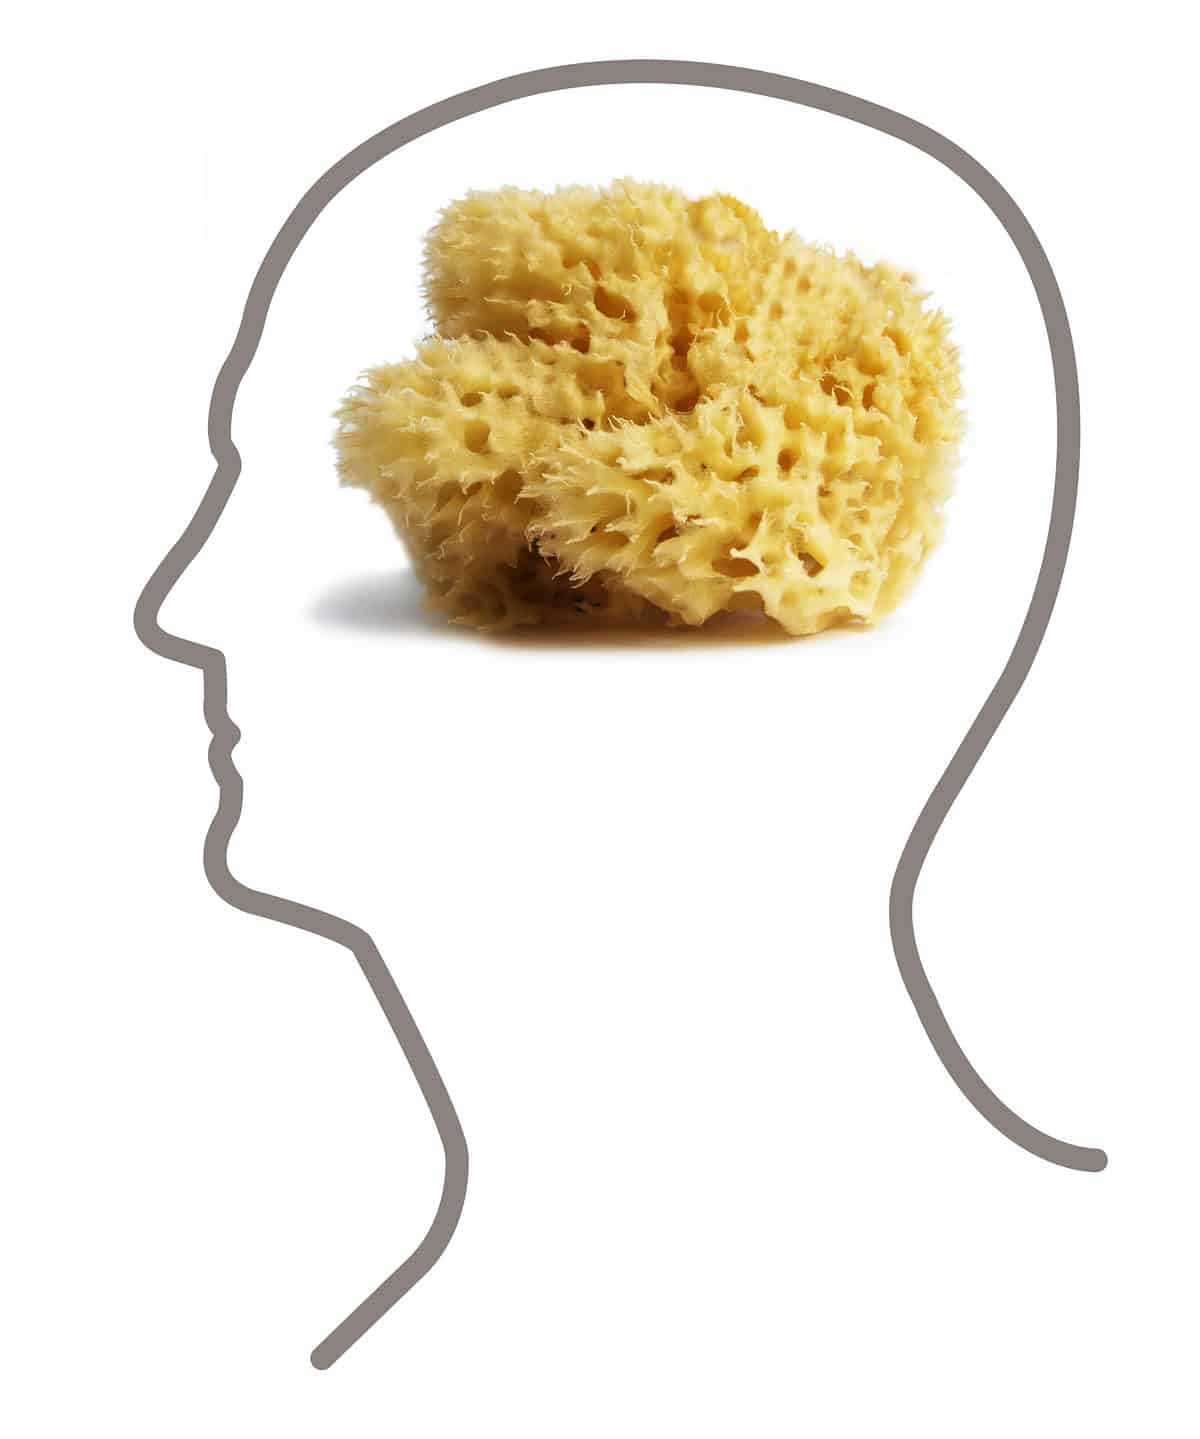 A gray outline of a human head in silhouette facing left frame. Within the outline is a natural sponge, which is light yellow and textured with many holes. The background is isolate white